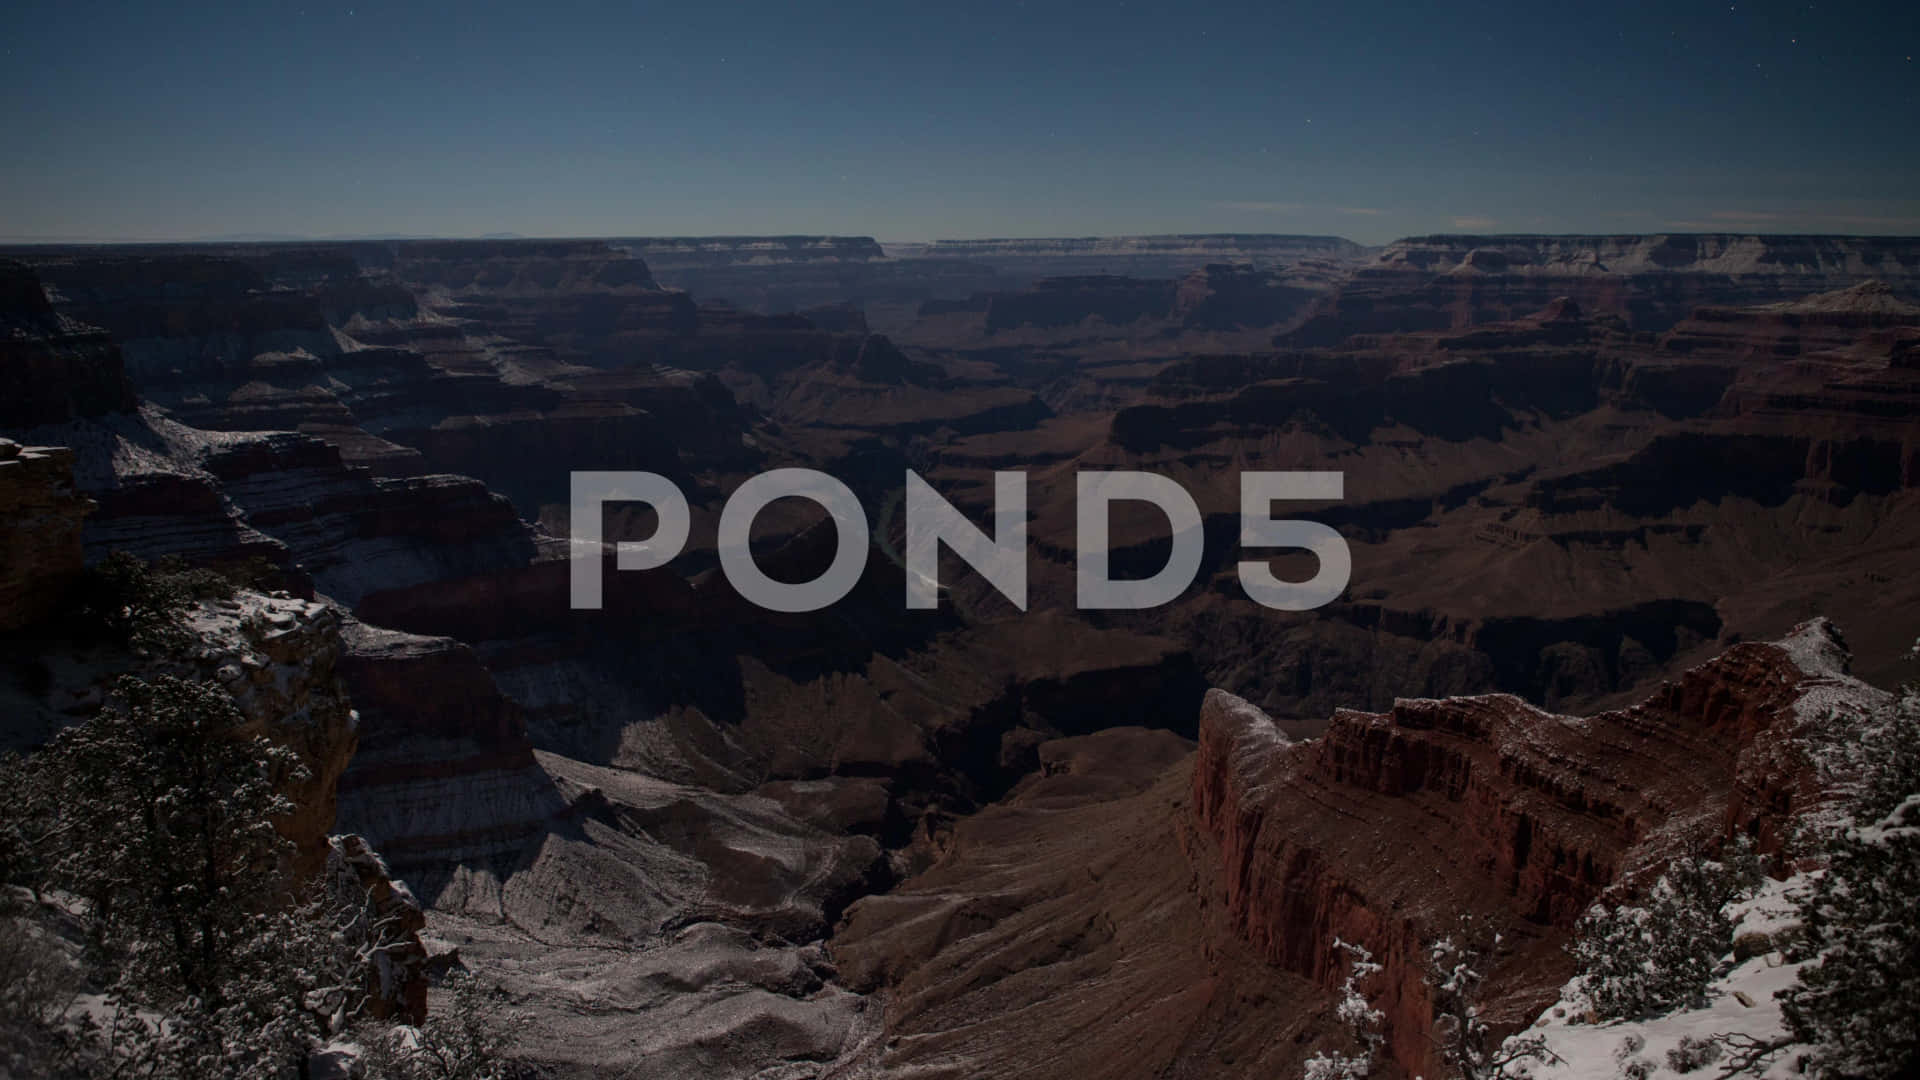 Pond5 Grand Canyon - Stock Footage Wallpaper